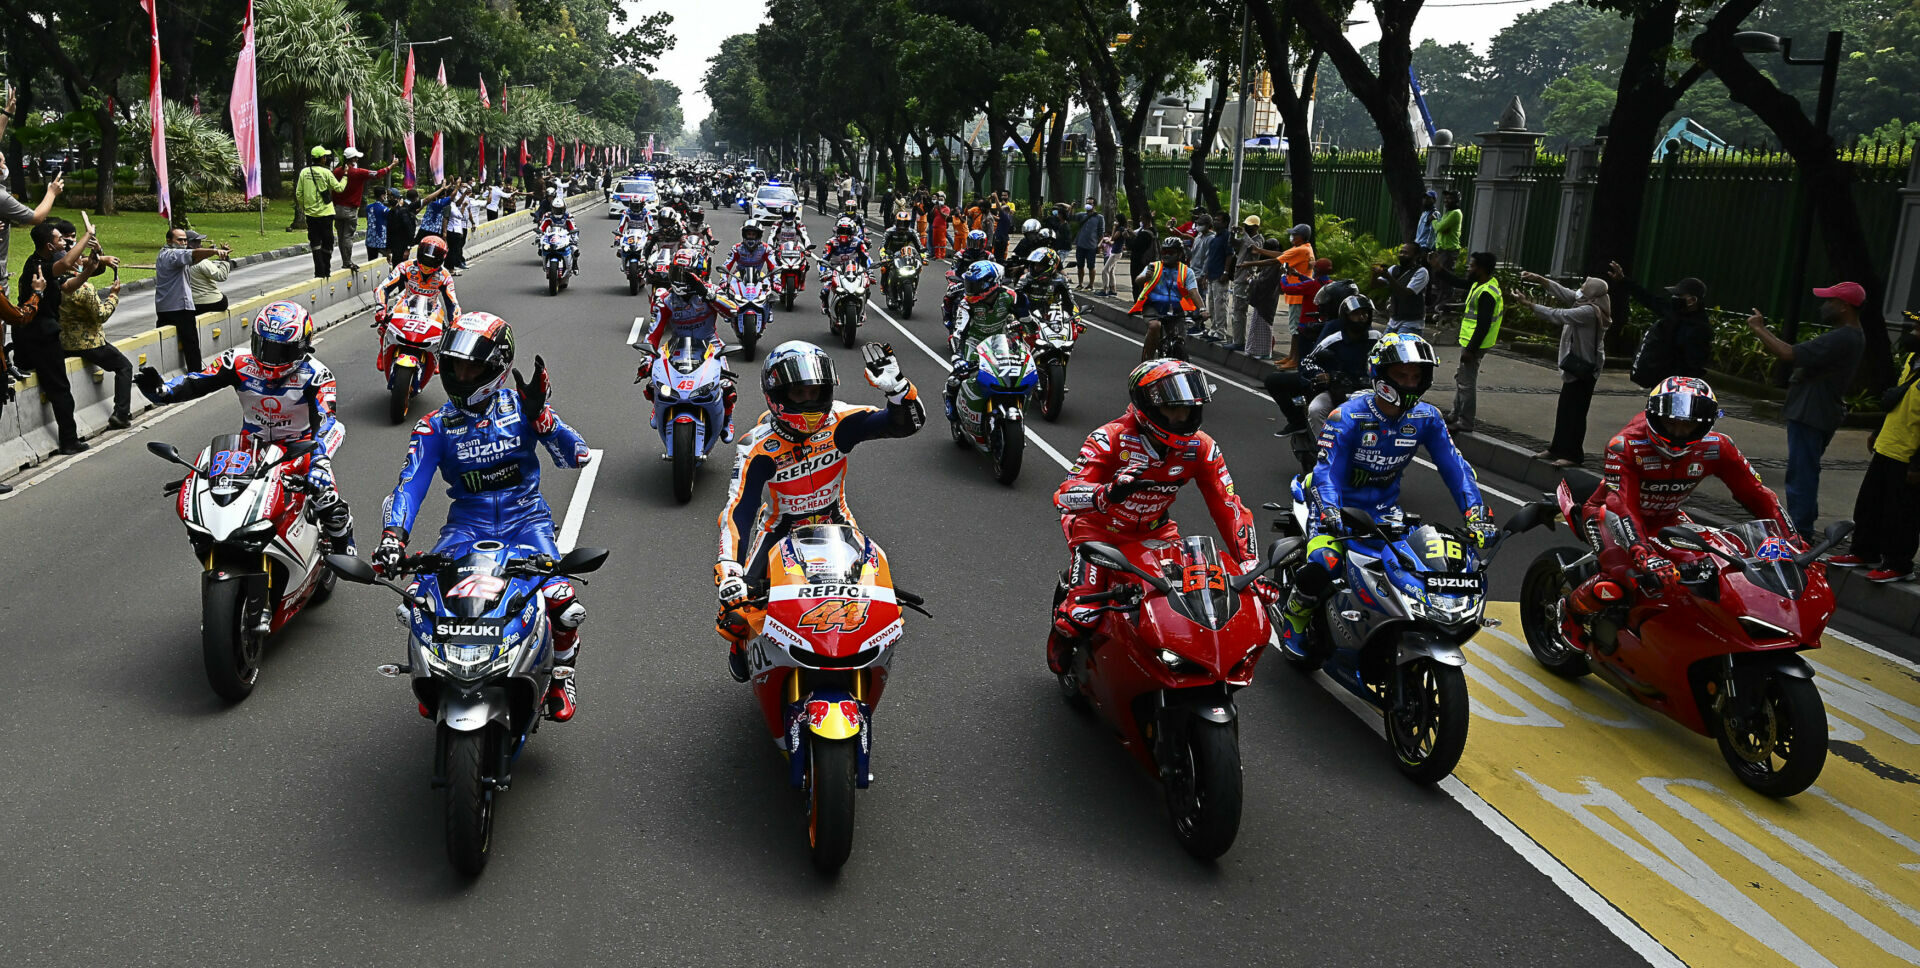 MotoGP riders, including (front row from left) Jorge Martin, Alex Rins, Pol Espargaro, Francesco Bagnaia, Joan Mir, and Jack Miller along with Indonesian President Joko Widodo (at the back of the first group wearing a white facemask), lead a parade through the streets of the Indonesian capital city of Jakarta. Photo courtesy Dorna.